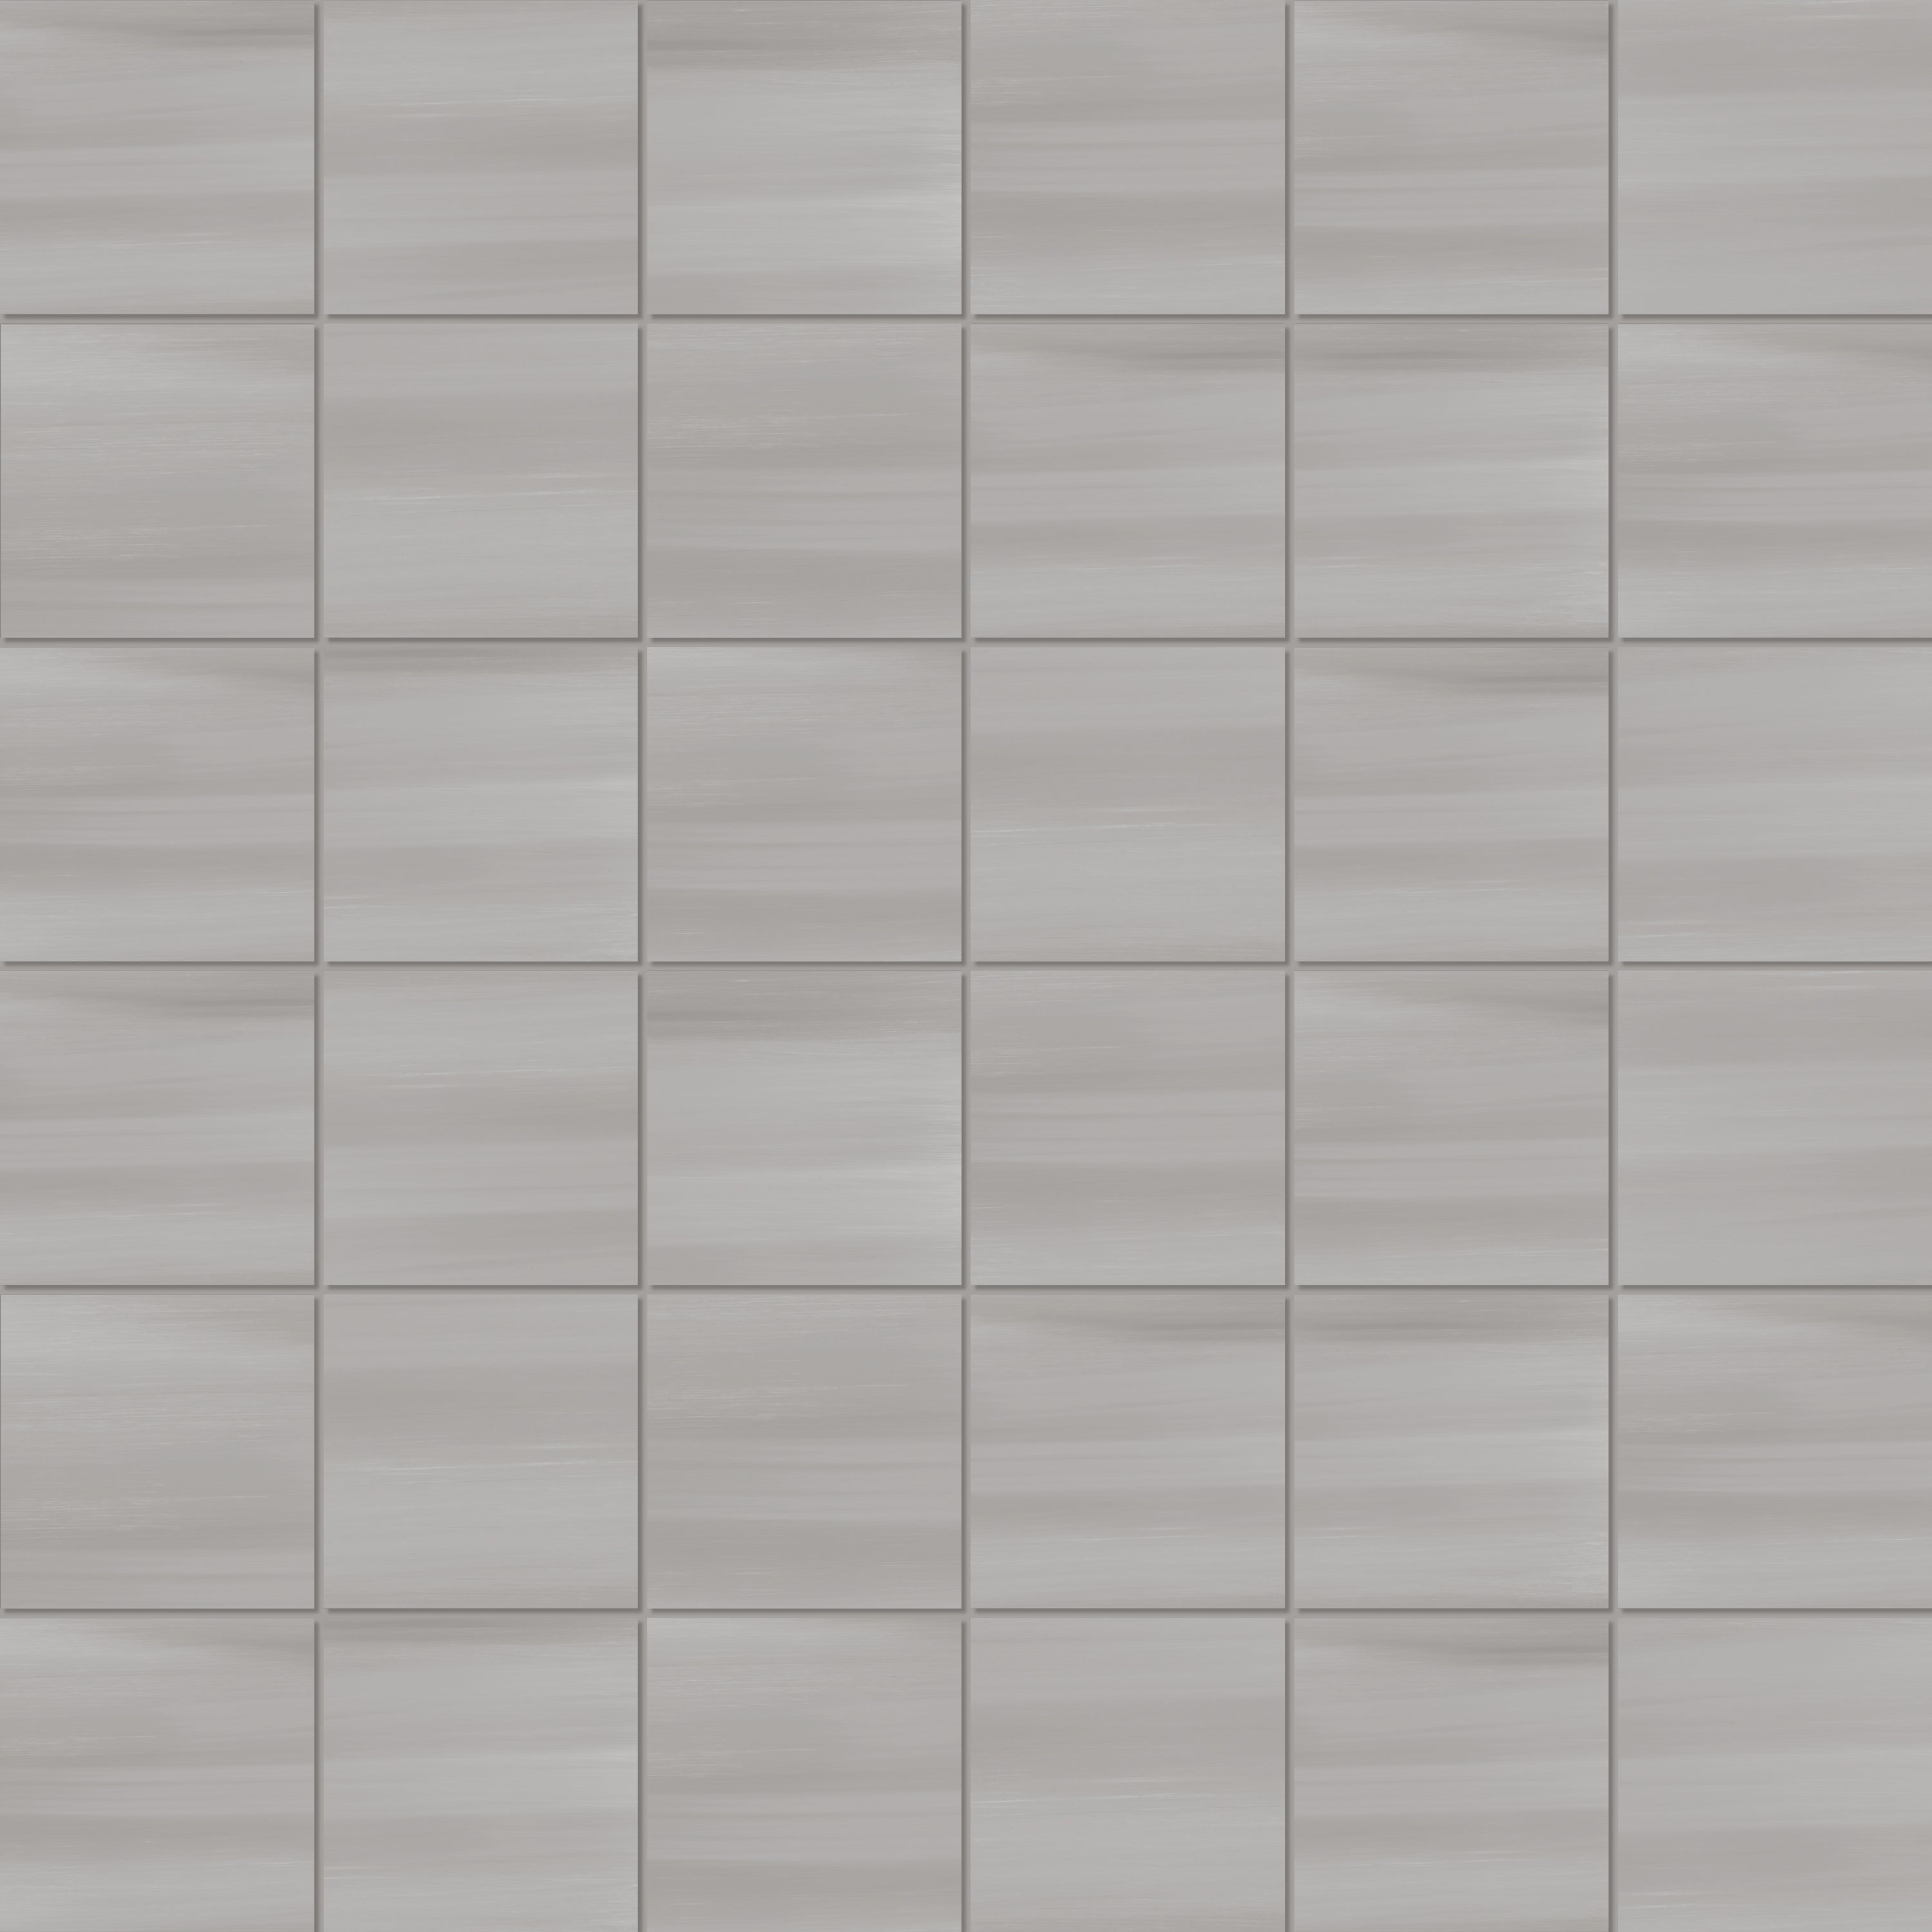 landmark contract miami titanium straight stack 2x2 mosaic 12x12x8mm matte pressed porcelain tile distributed by surface group international